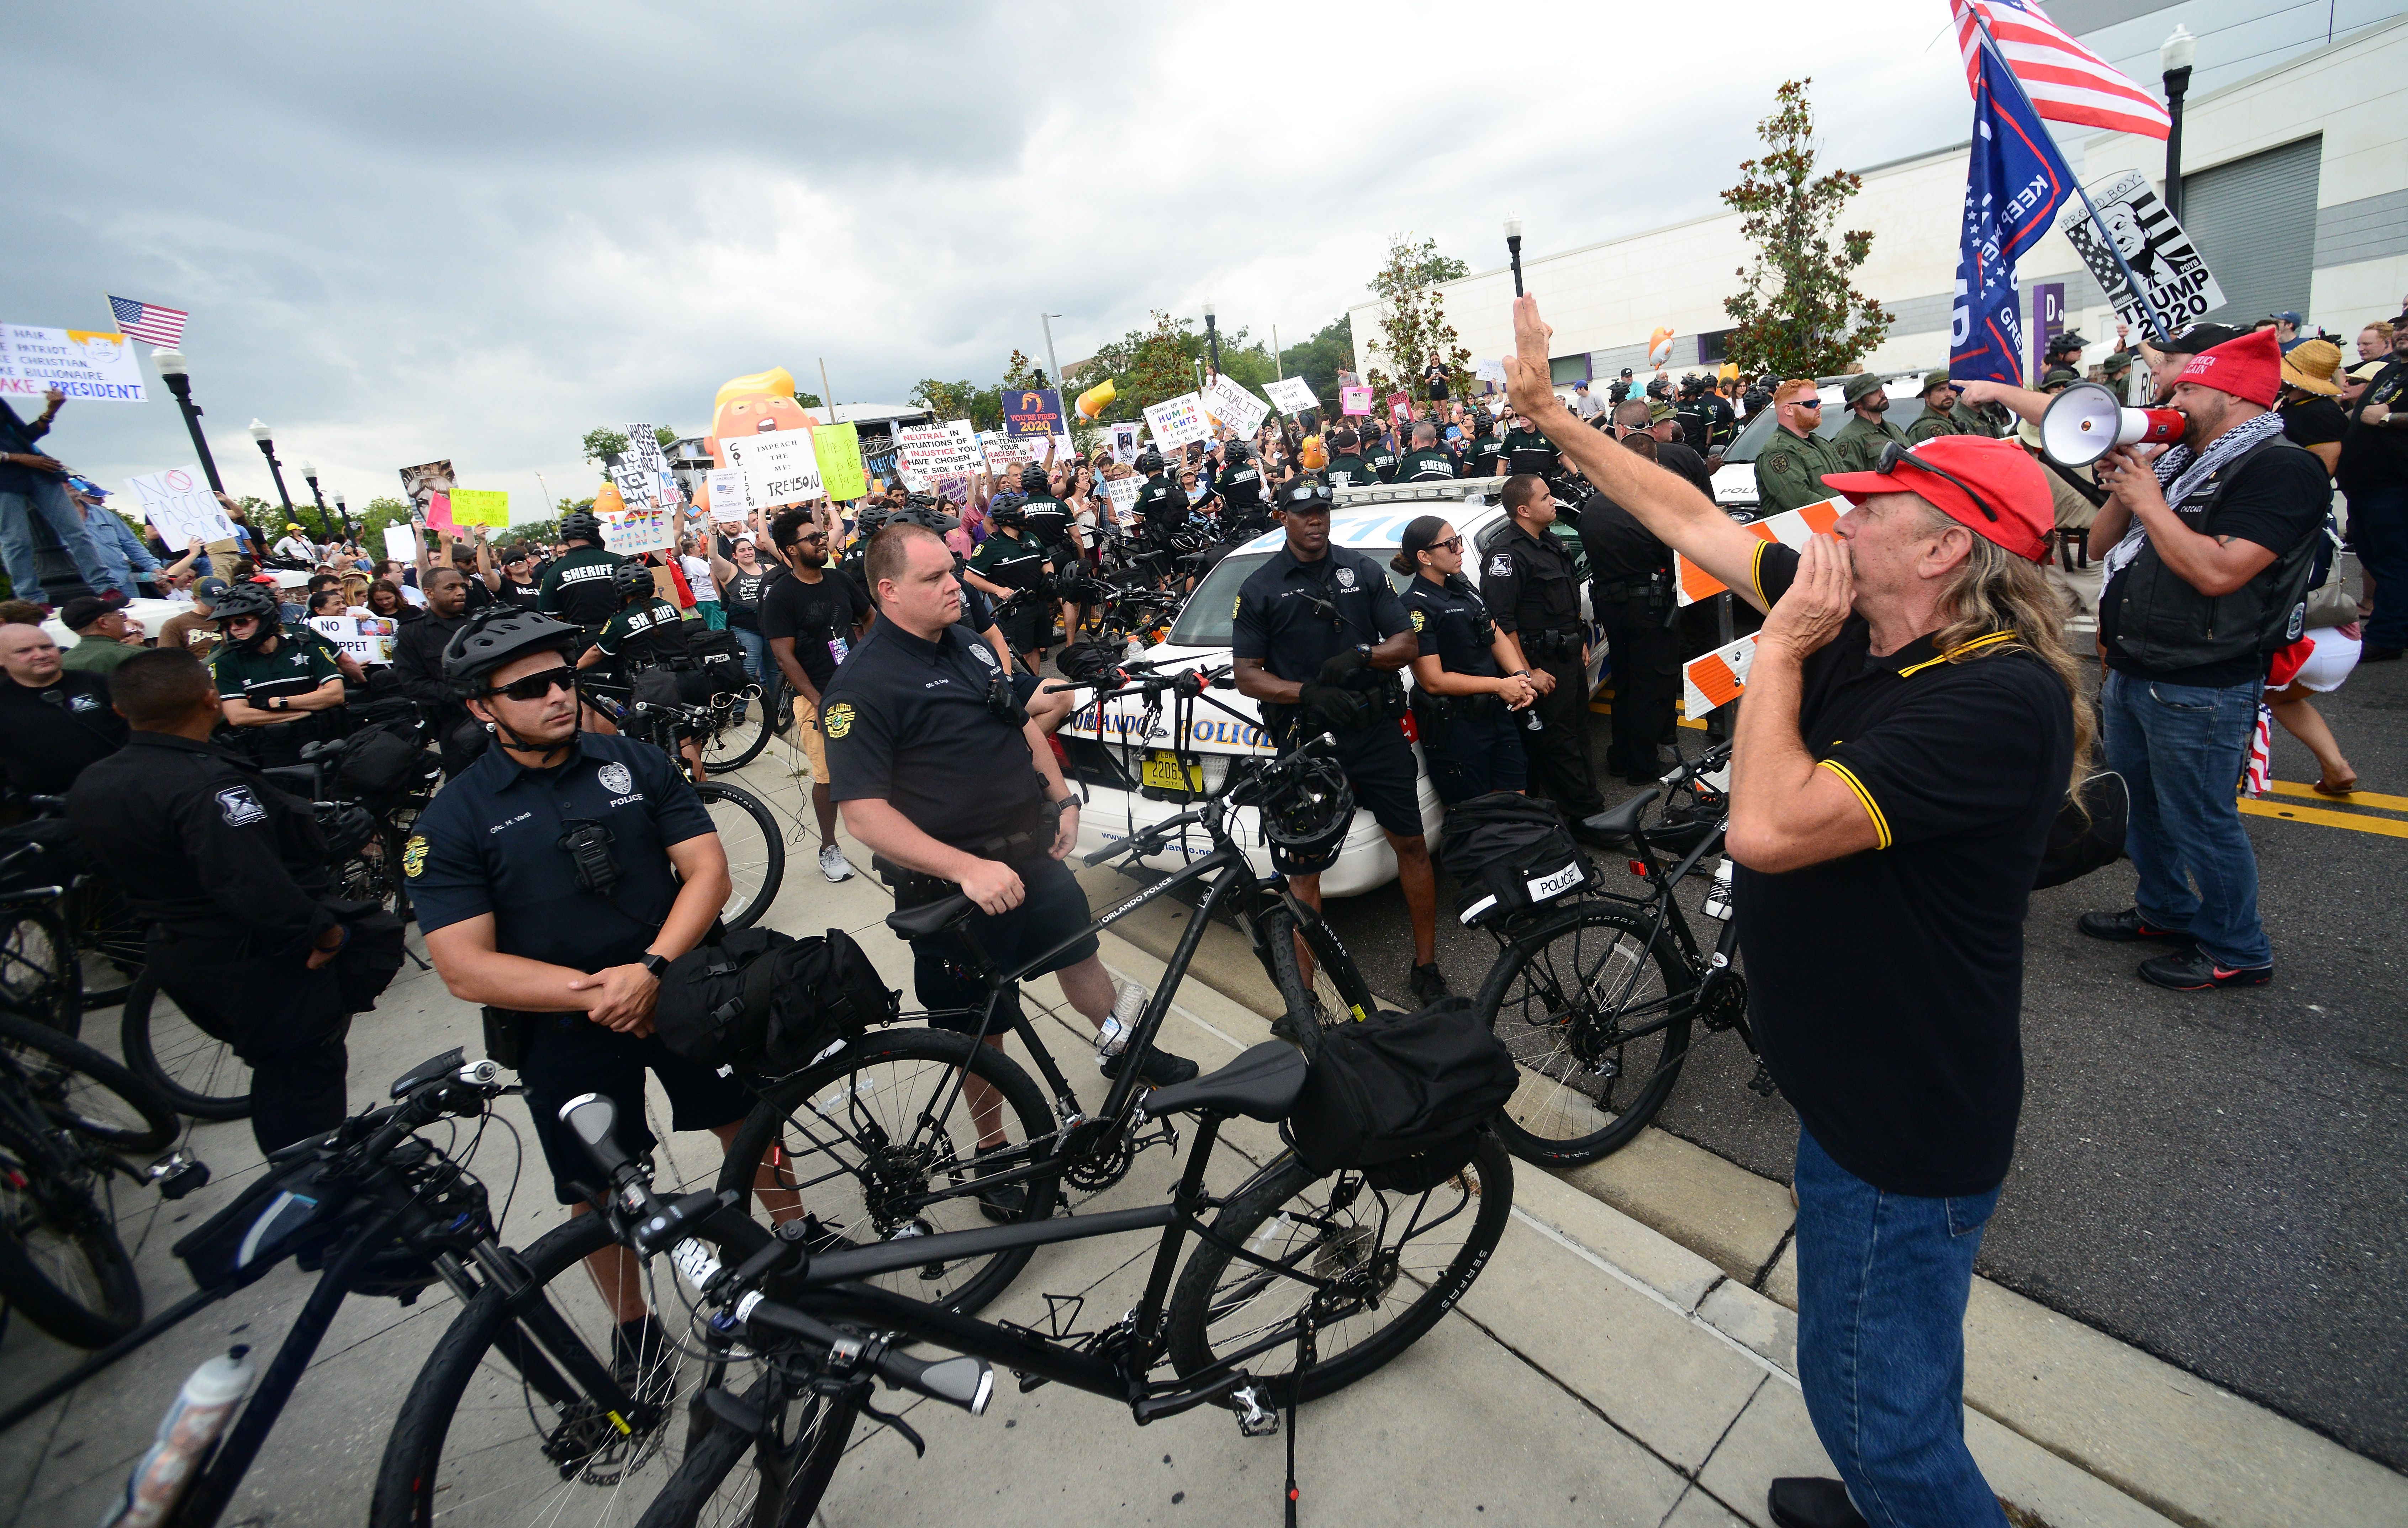 Members of the Proud Boys face off against anti-Trump protesters outside a rally where President Trump officially launched his re-election campaign on June 18, 2019 in Orlando, Florida. 